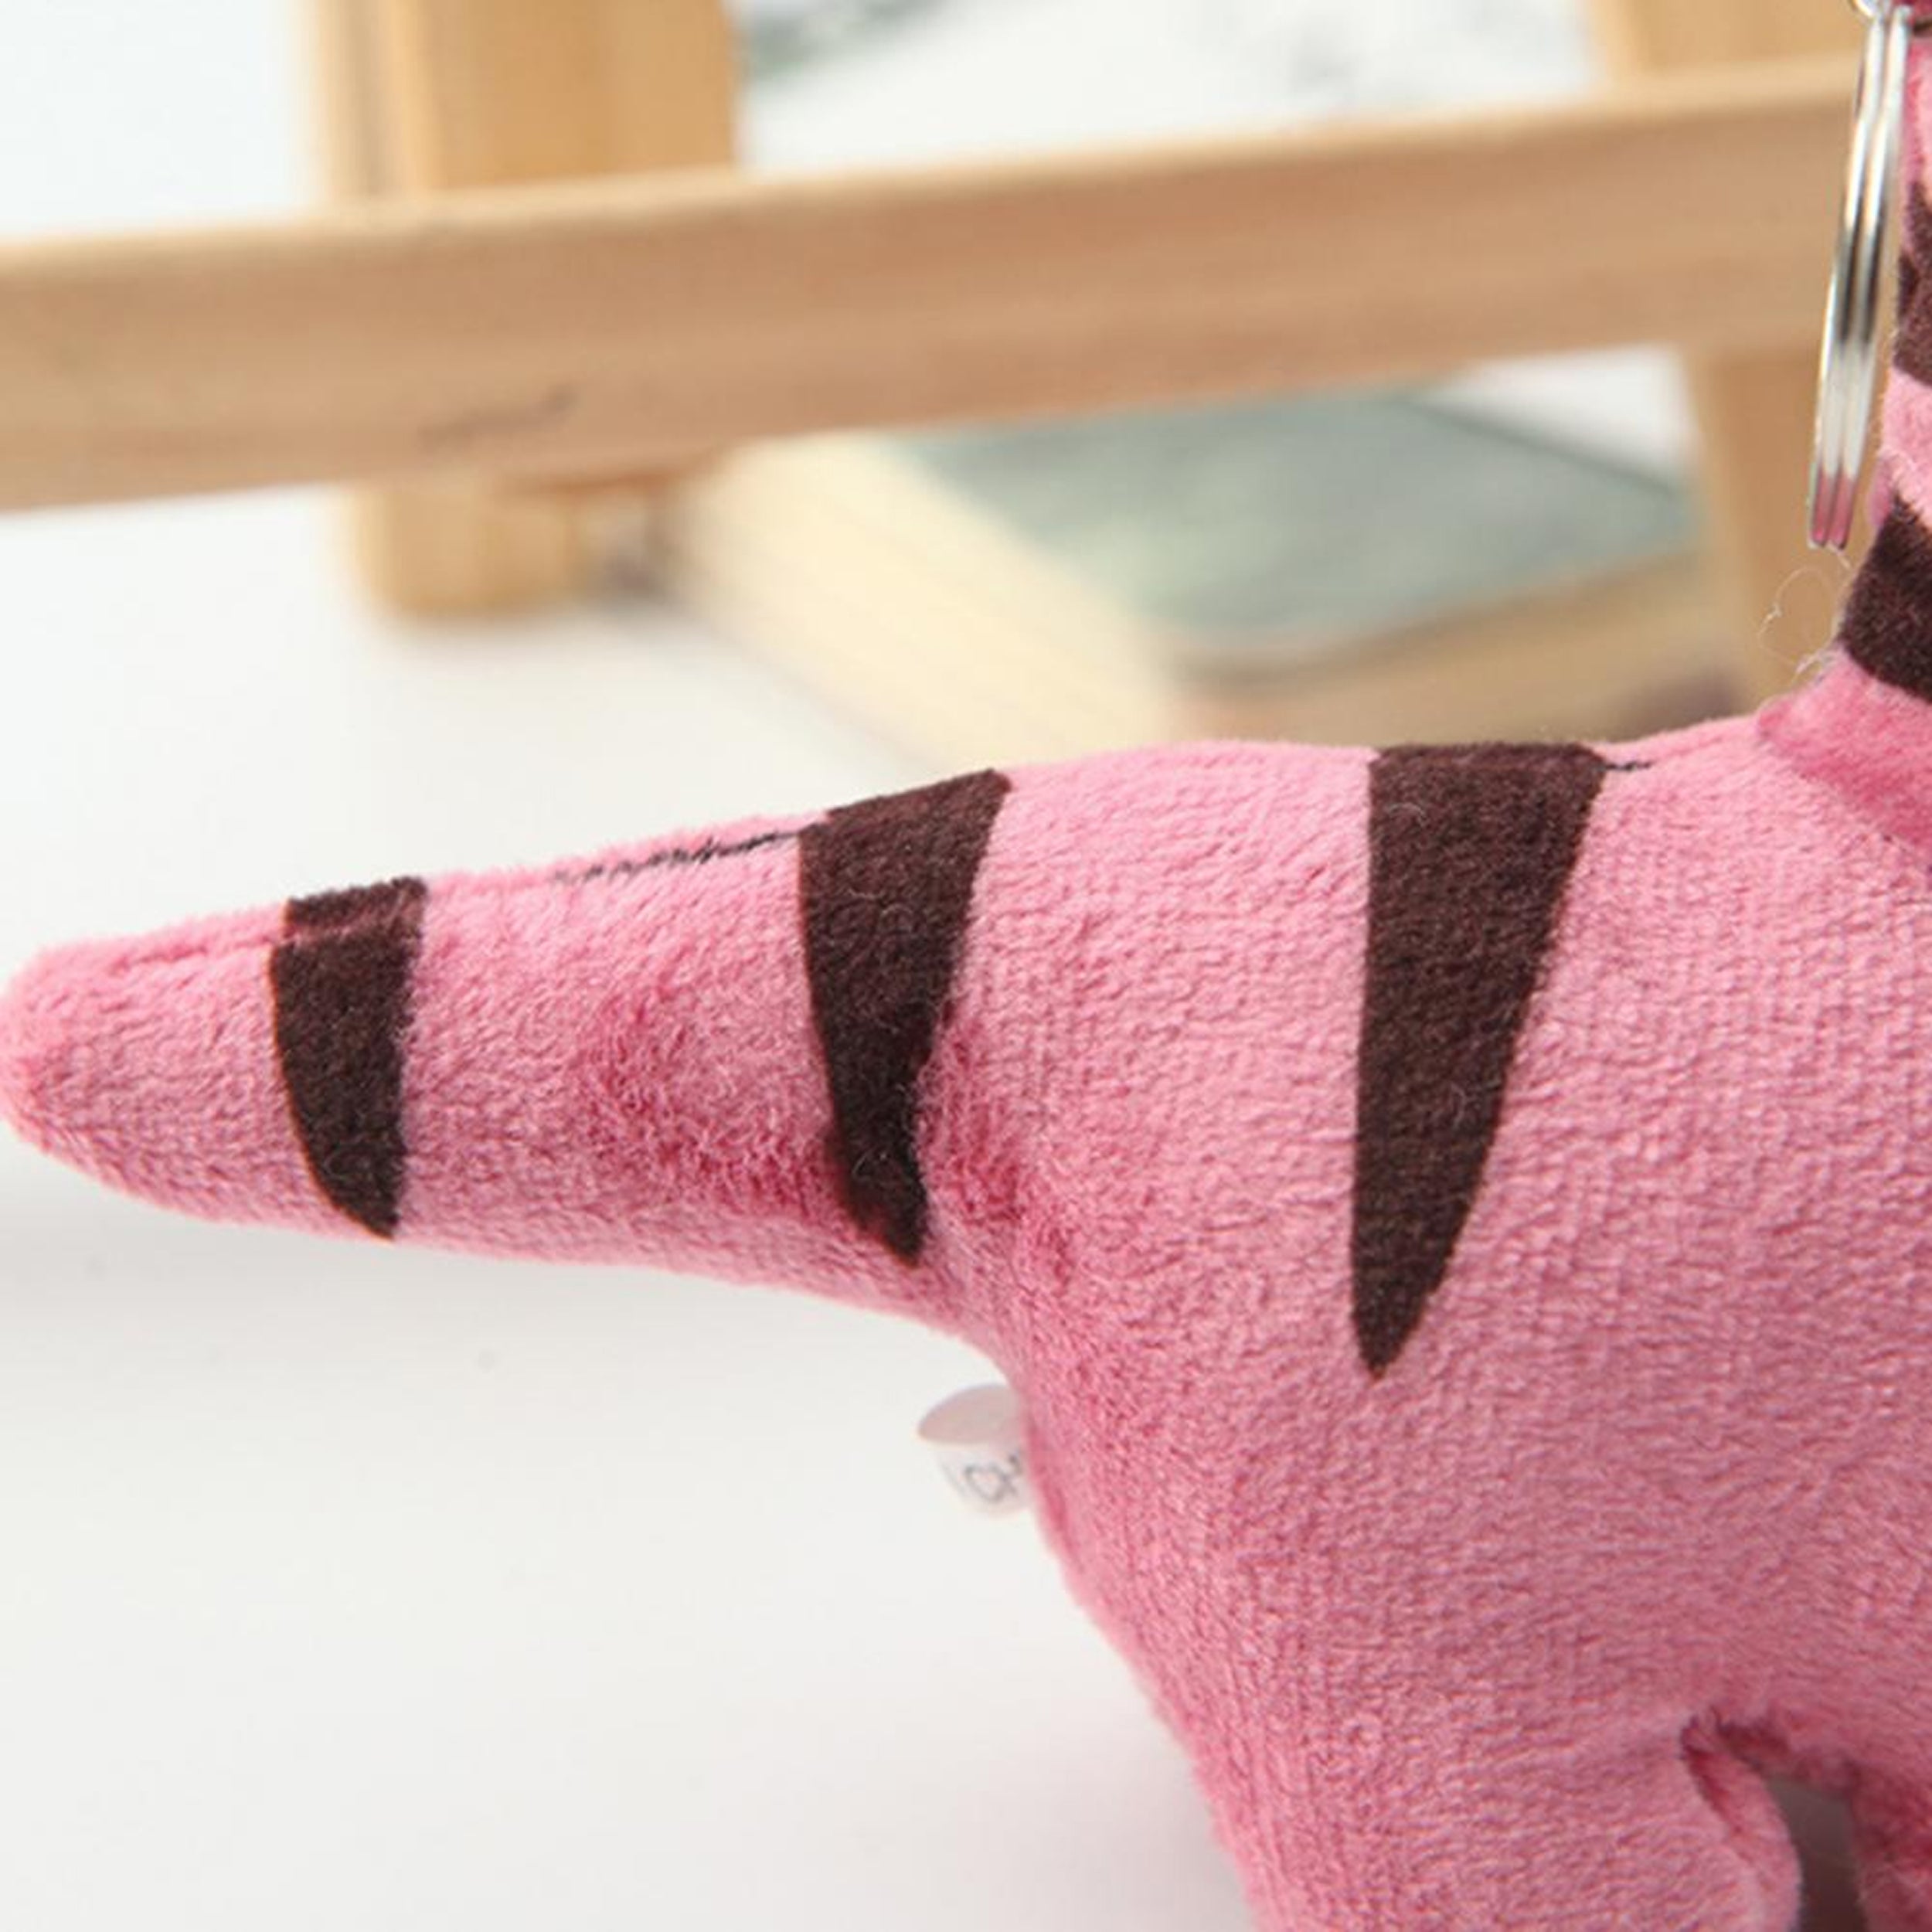 Add Some Adventure to Your Kid's Keys with Our Mini Dinosaur Soft Plush Keychain